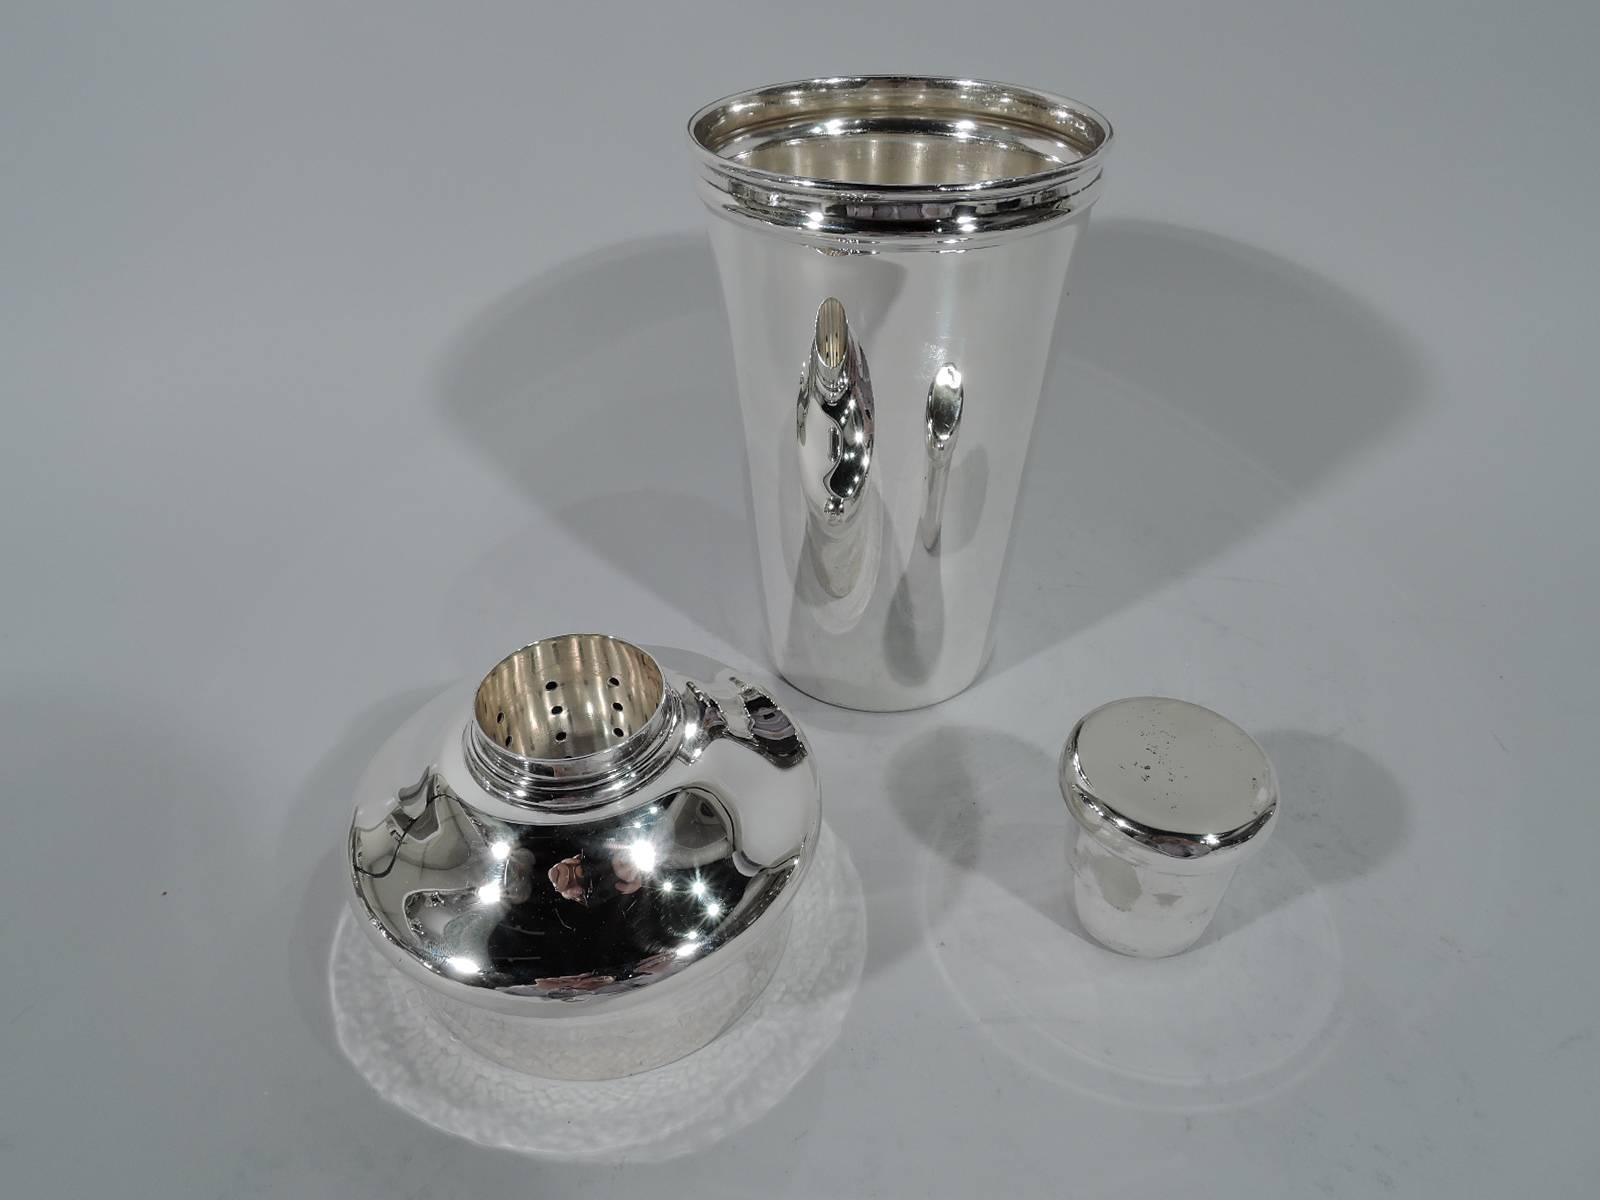 Sterling silver cocktail shaker. Made by Tiffany & Co. in New York, ca 1915. Cup has straight and tapering sides. Bellied and domed top with central built-in strainer and plug. Innovative and functional. Hallmark includes pattern no. 18917 (first